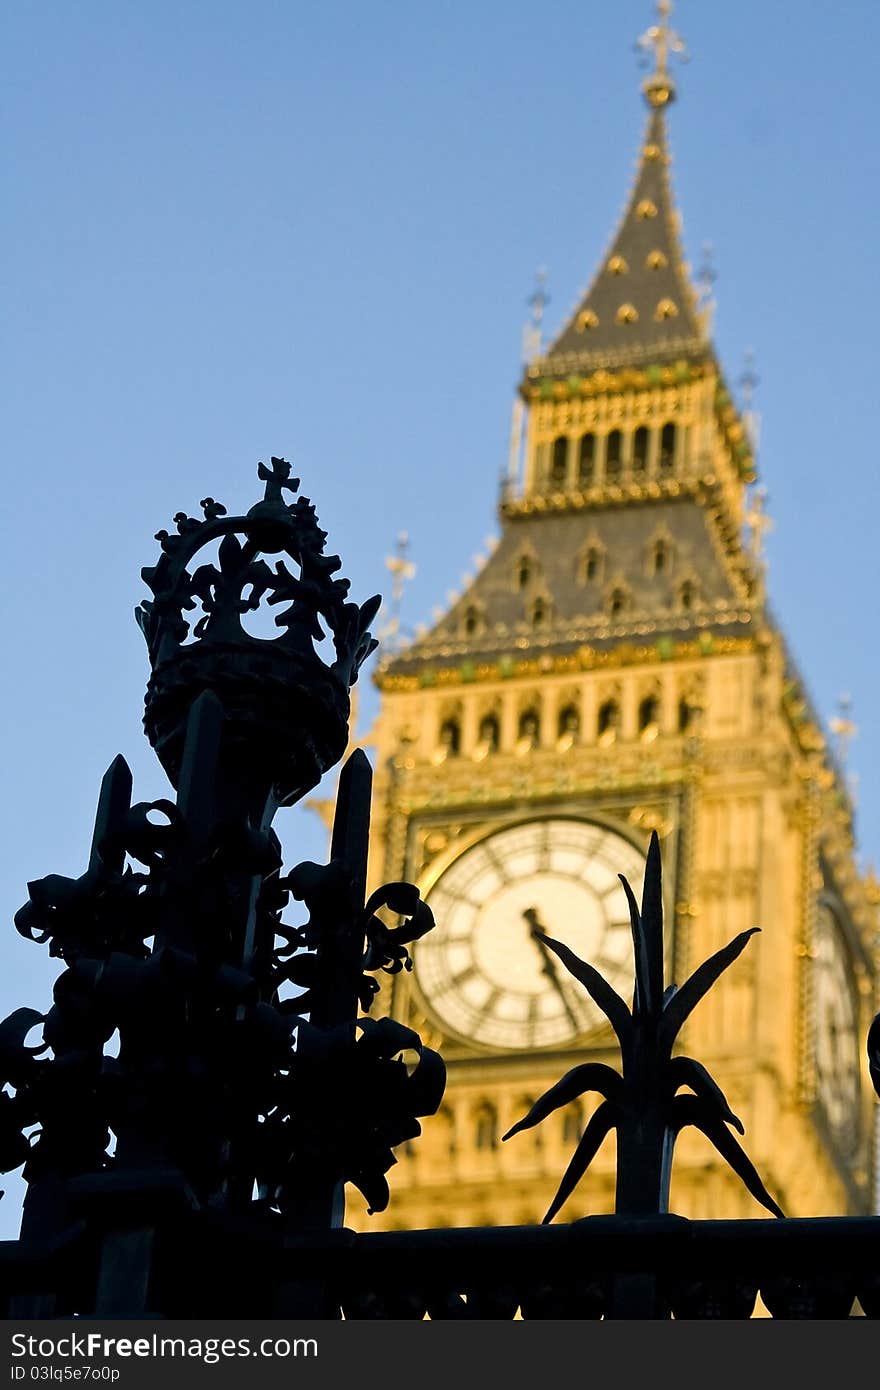 Grille of the Houses of Parliament on the background of Big Ben clock tower in the sunset. Grille of the Houses of Parliament on the background of Big Ben clock tower in the sunset.